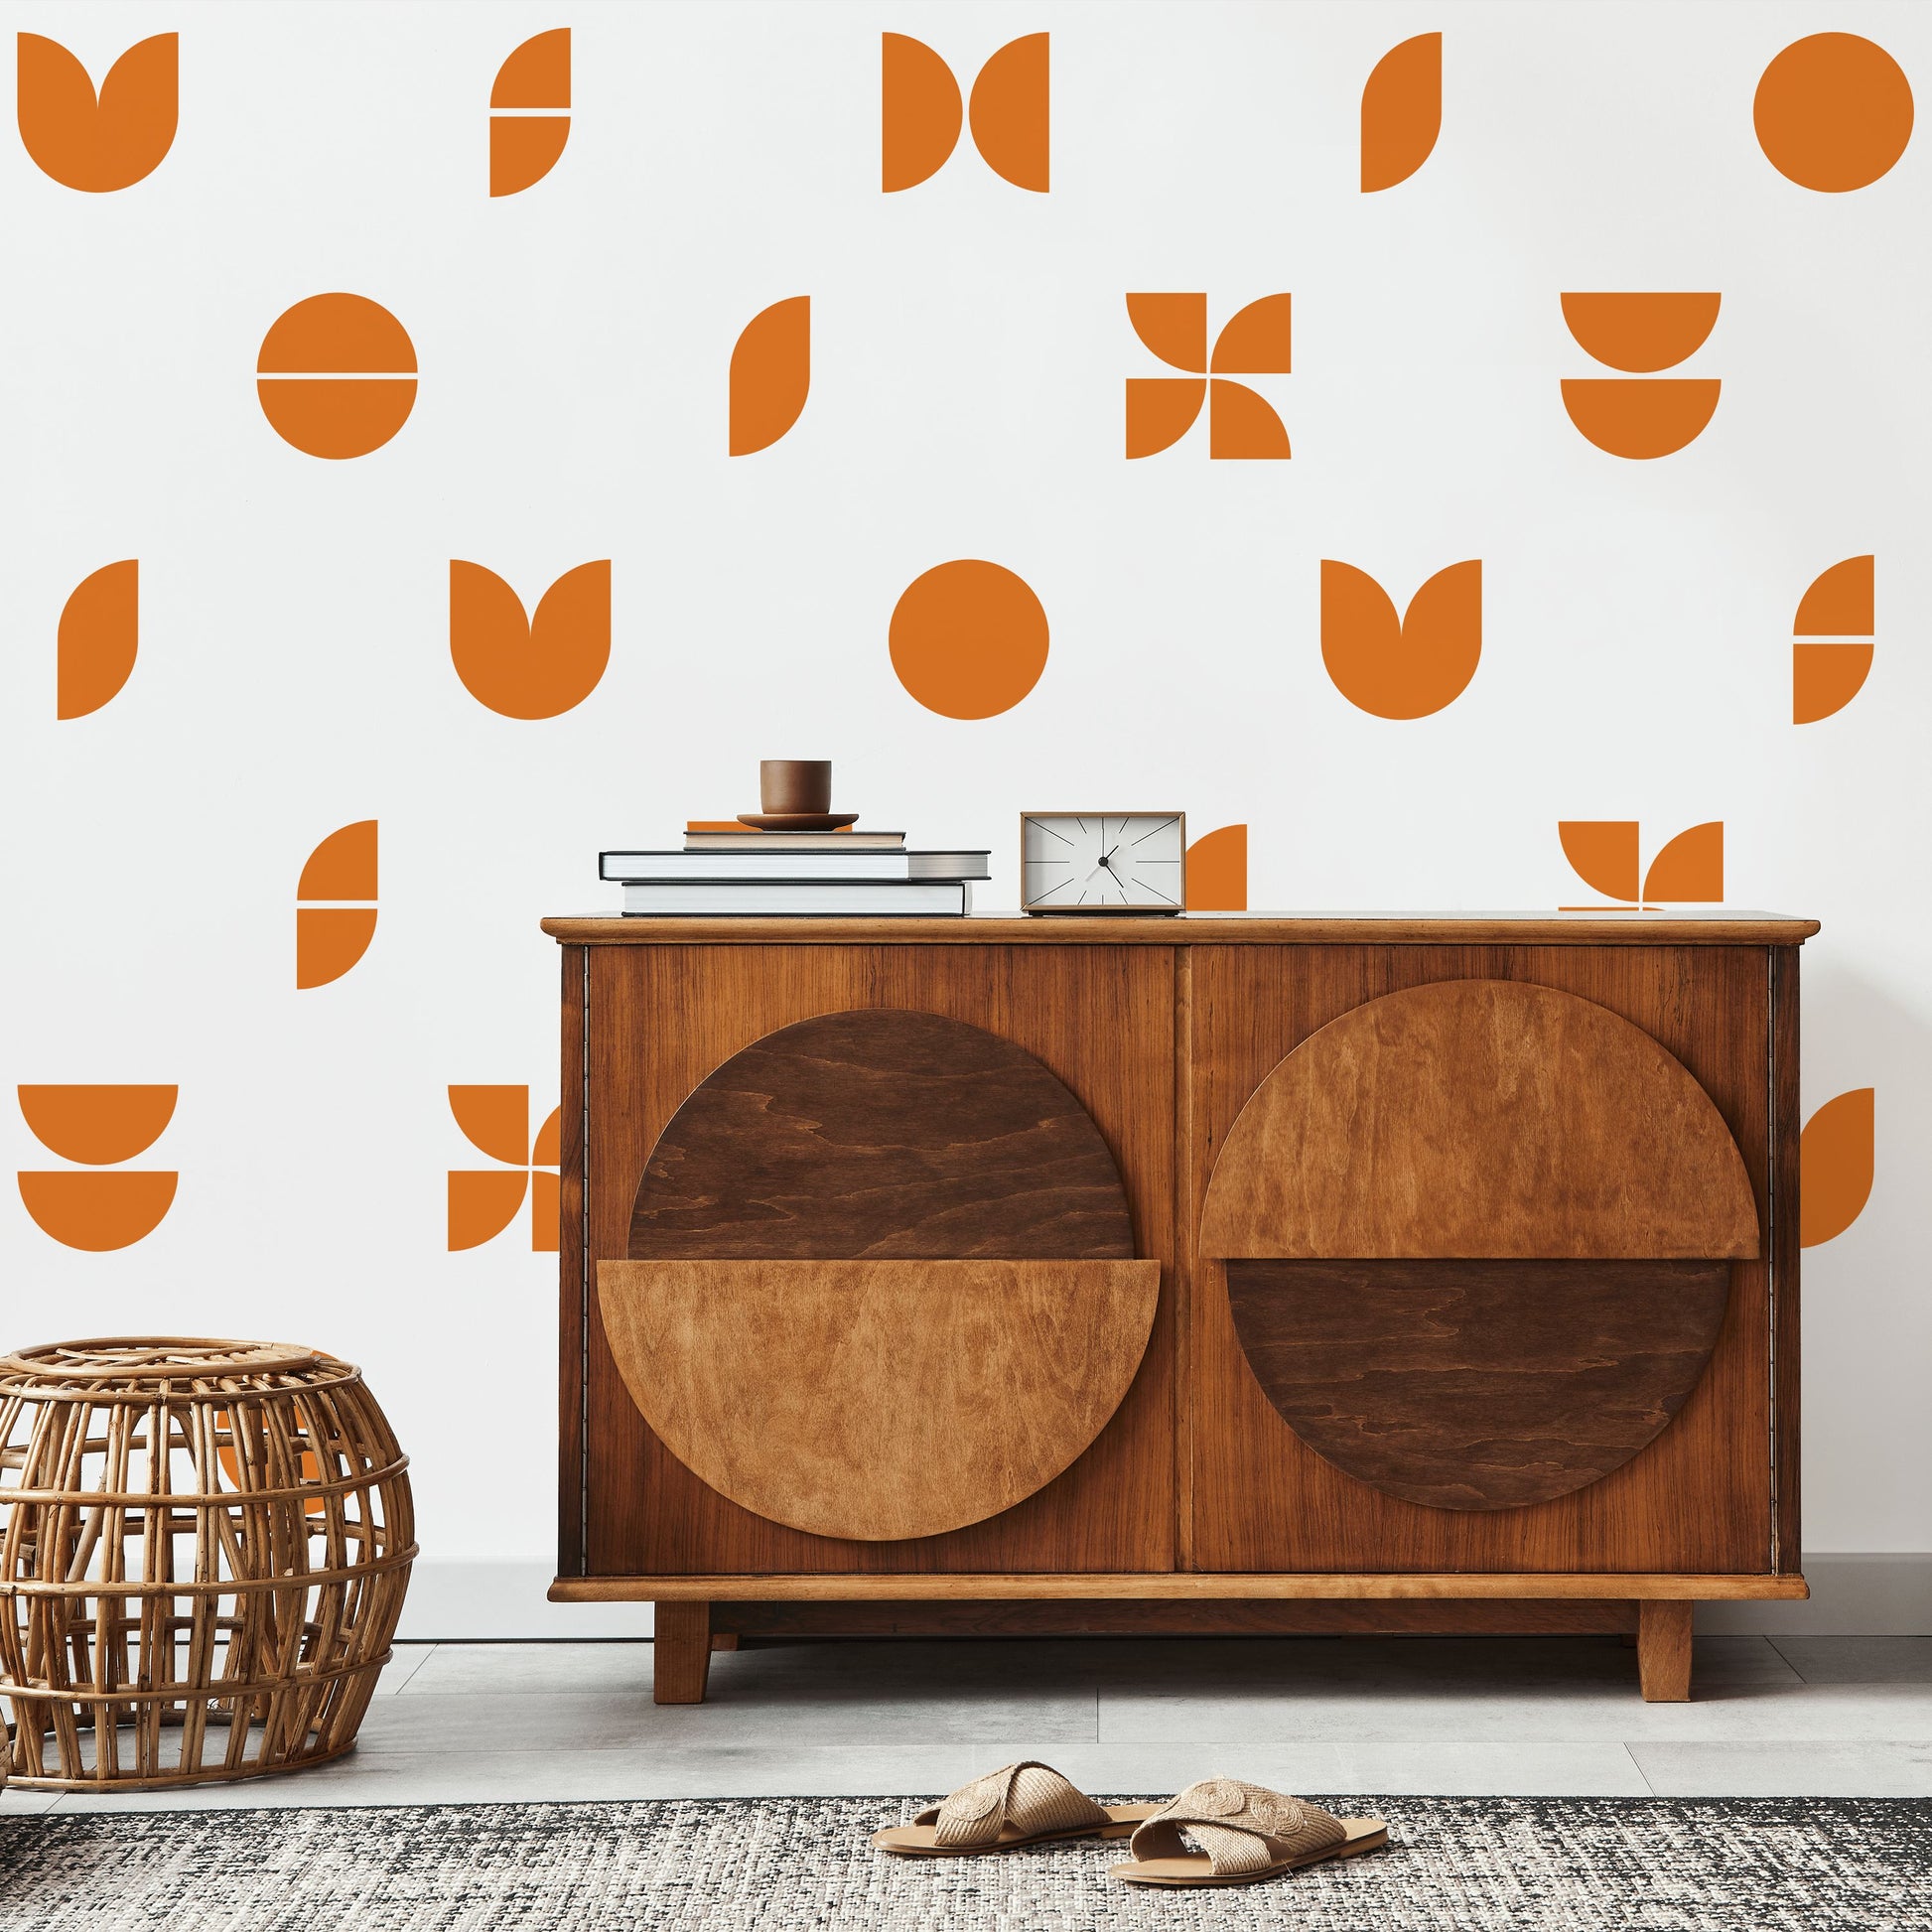 Pack A Punch Wall Decals Decals Sunny Circle Studio Orange Large 8in 